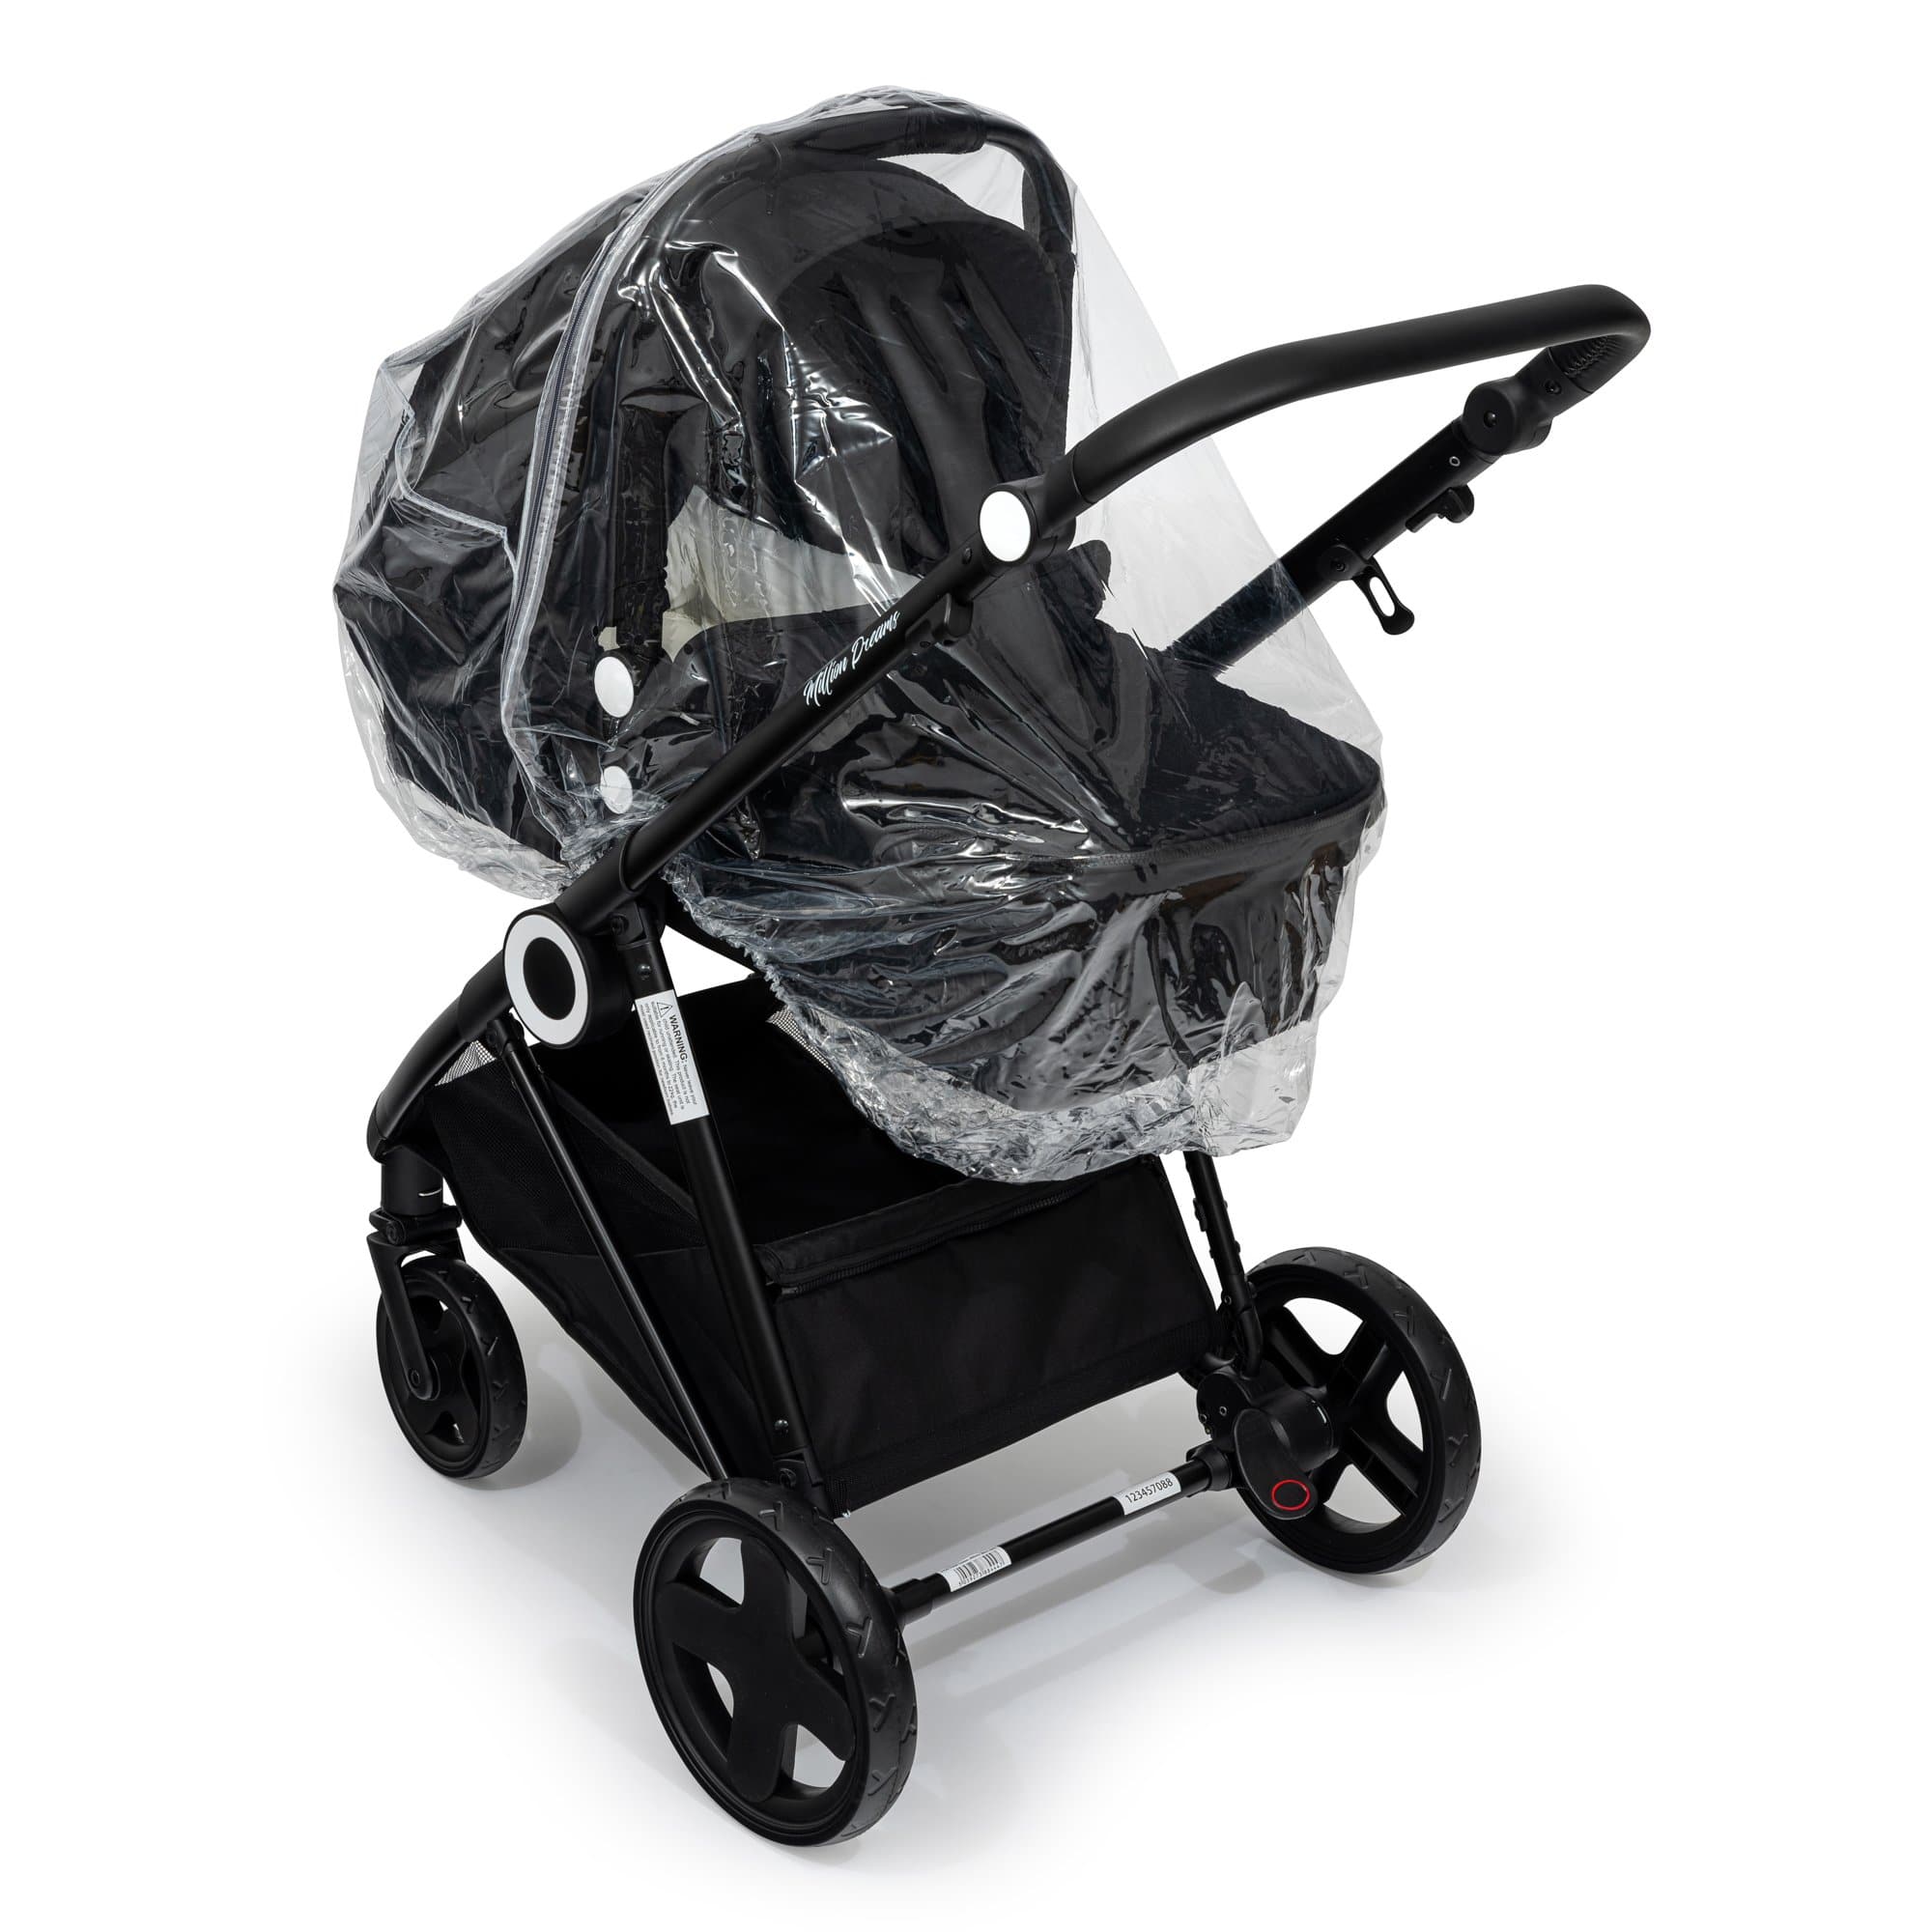 Universal Carrycot Raincover - Fits All Models - For Your Little One